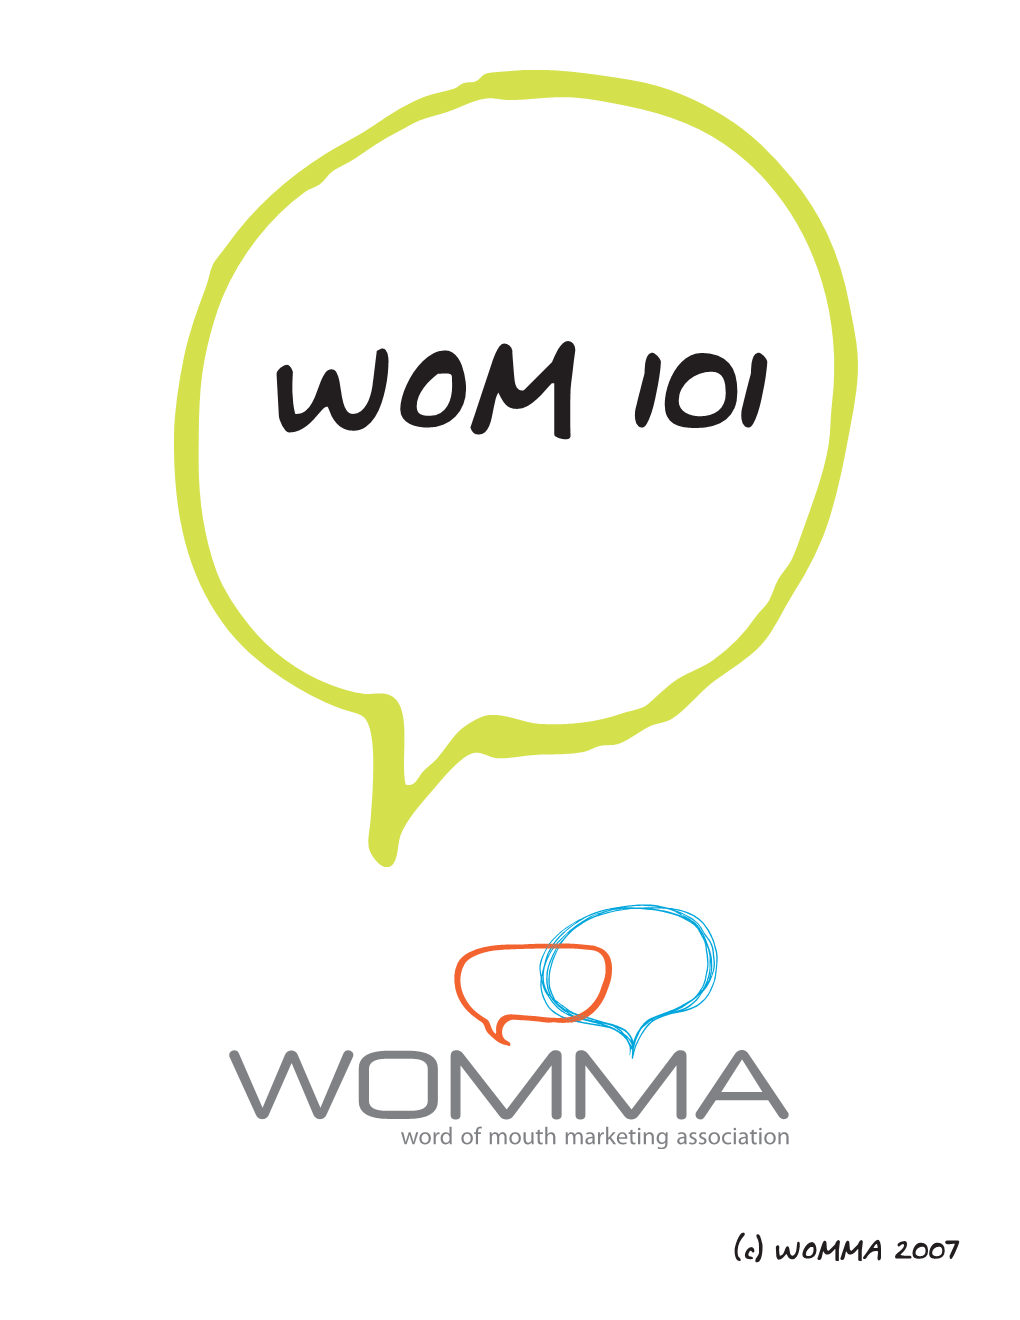 © (C) WOMMA 2007 an Introduction to WOM Marketing with Definitions: Word of Mouth: the Act of Consumers Providing Information to Other Consumers